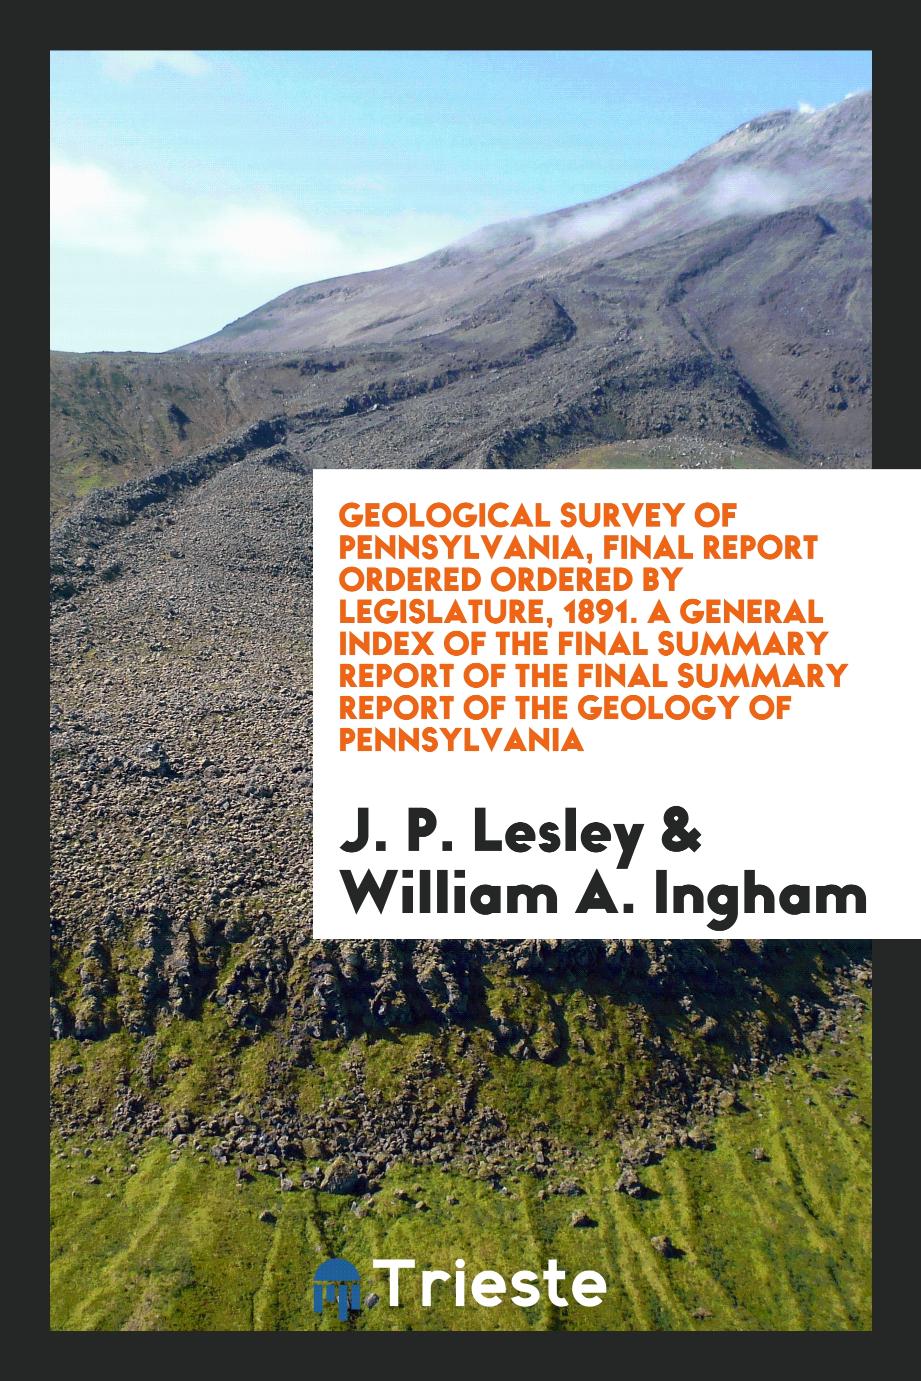 Geological Survey of Pennsylvania, Final Report Ordered Ordered by Legislature, 1891. A General Index of the Final Summary Report of the Final Summary Report of the Geology of Pennsylvania